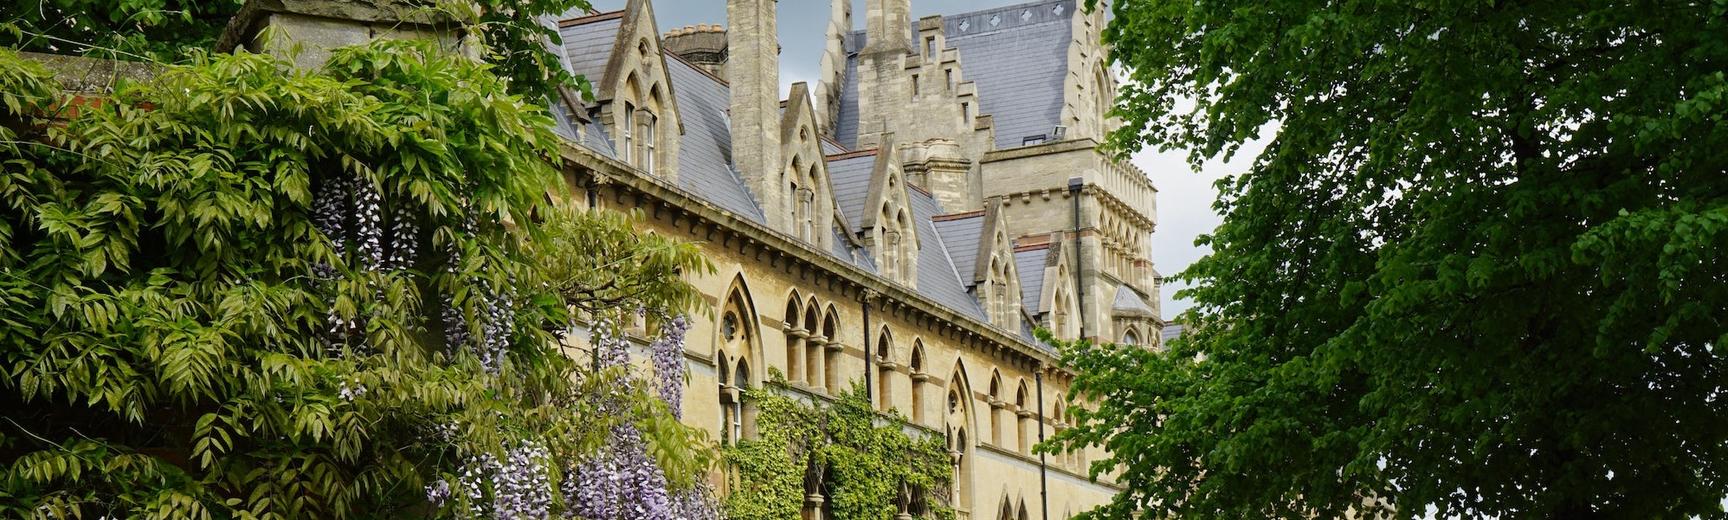 A picture of a garden with flowering purple wisteria cascading over other green plants with a large tall sandstone college building in the background, built in the neo-gothic style.